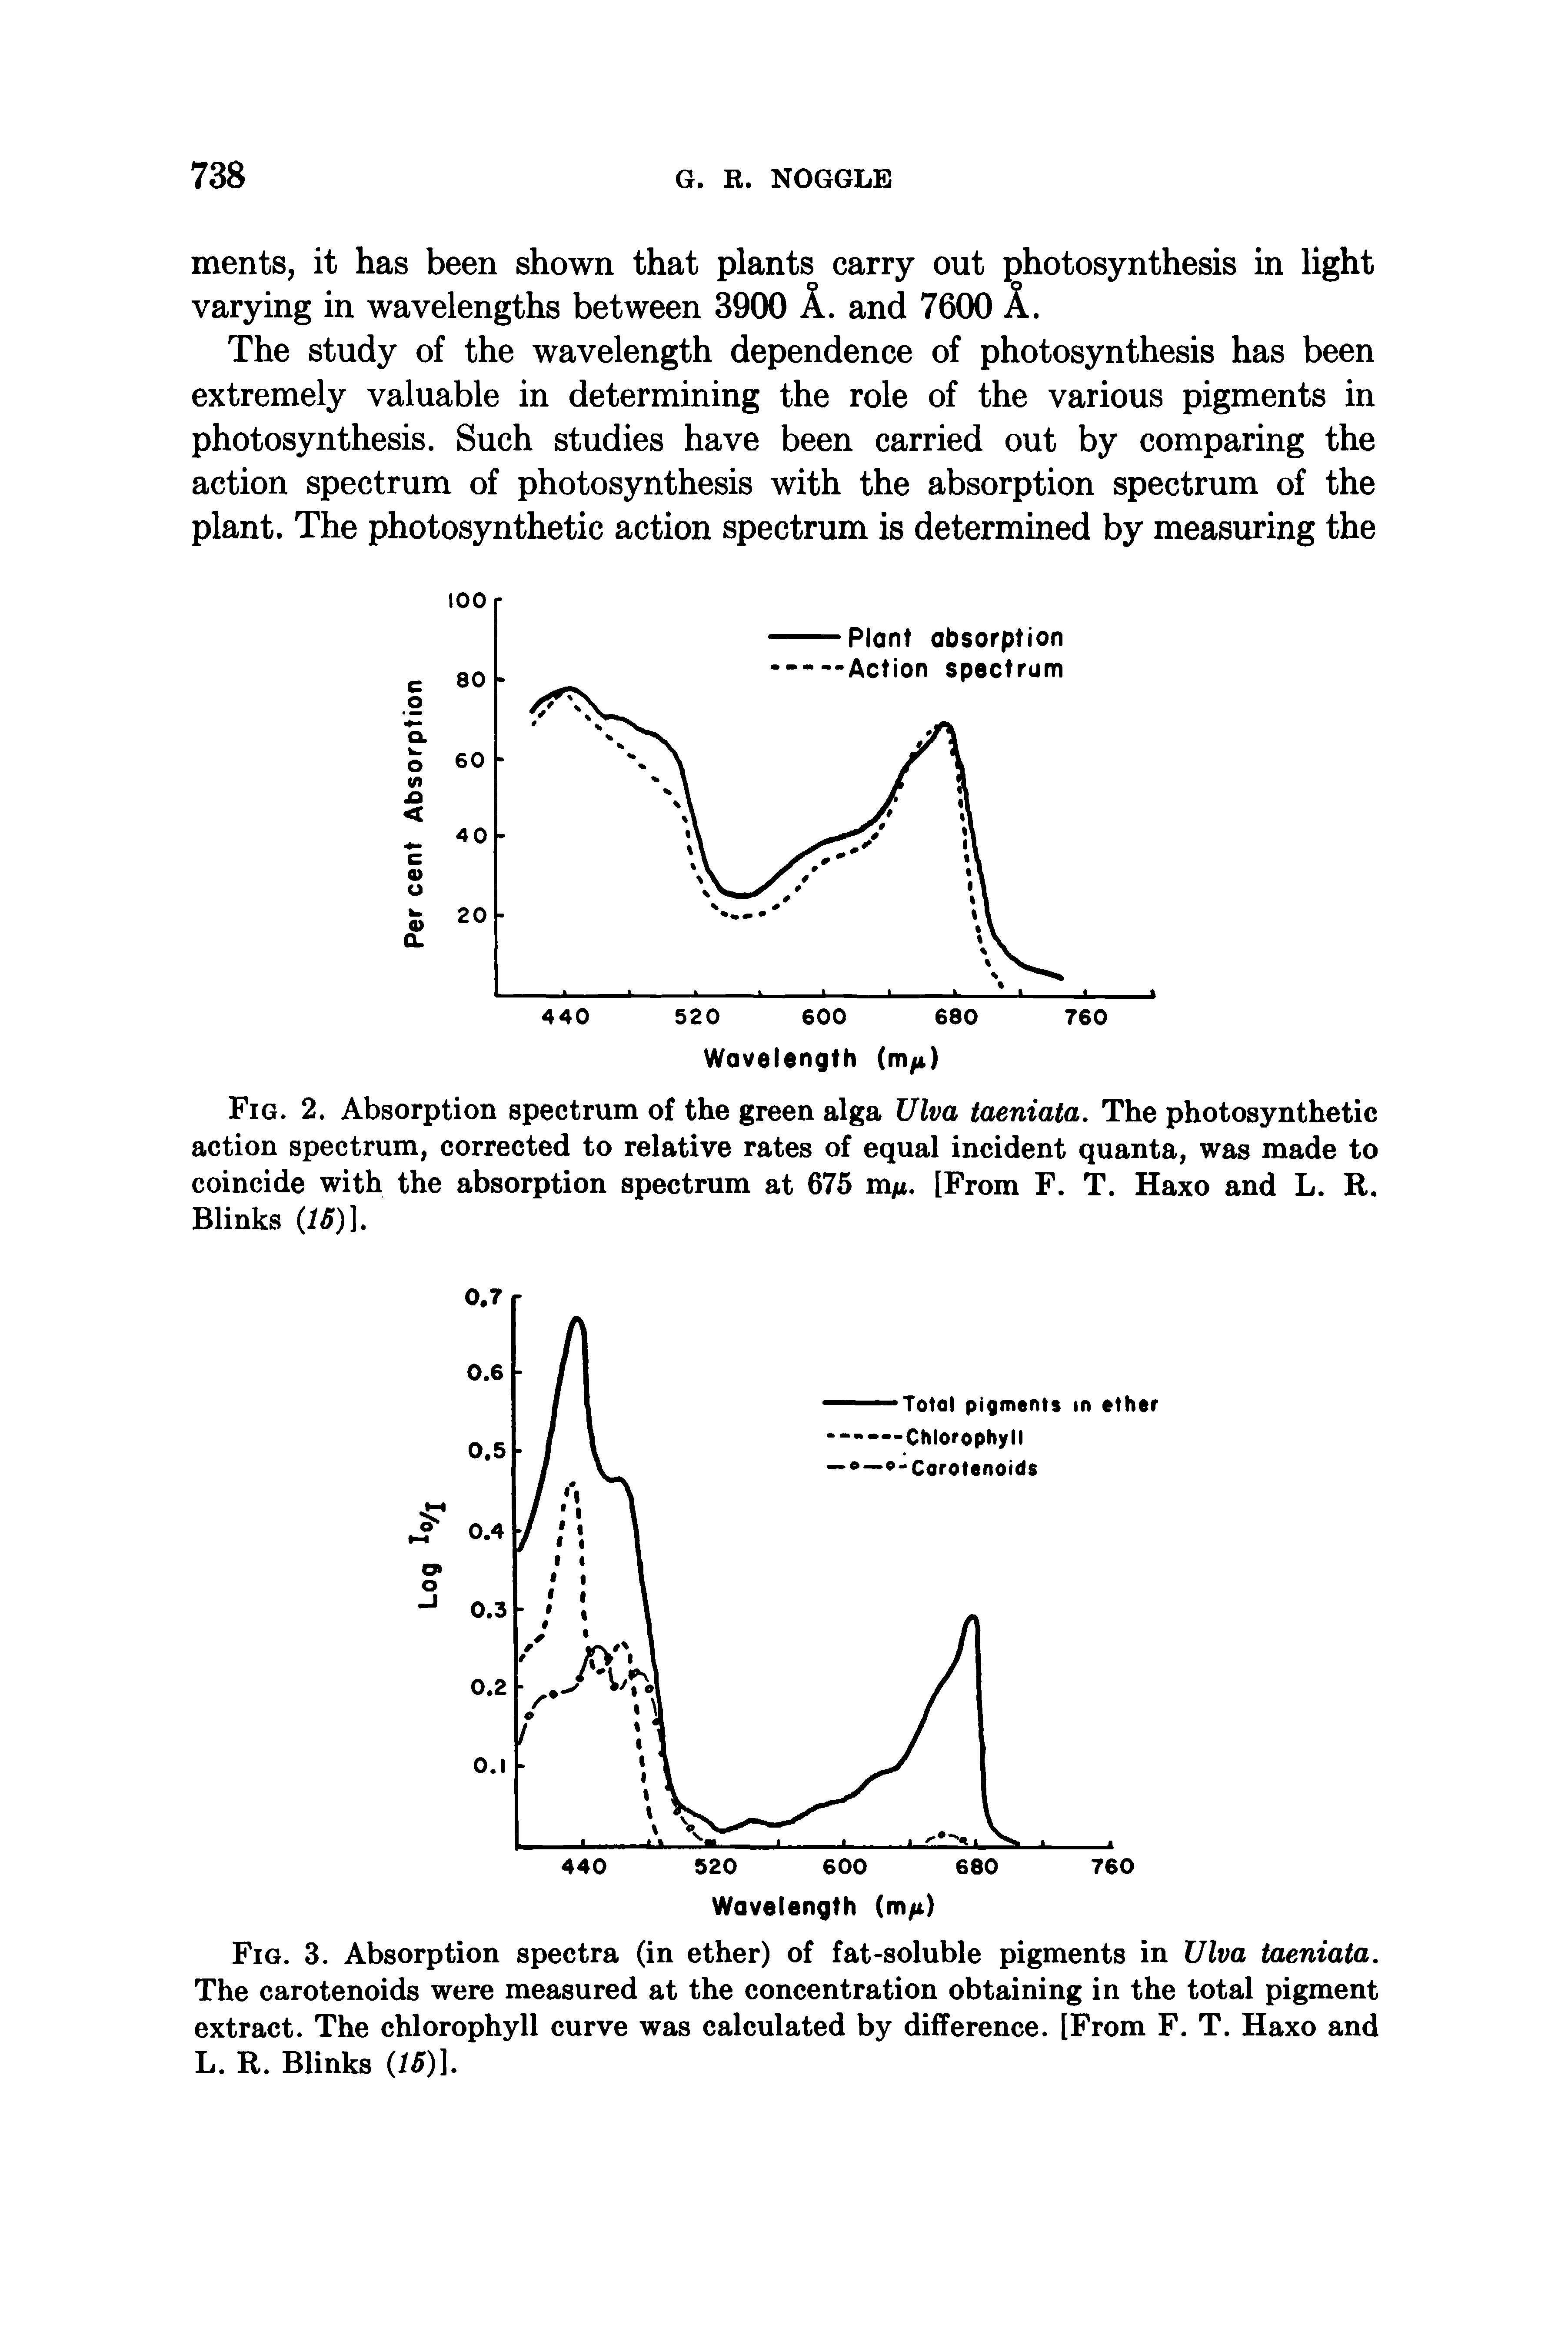 Fig. 2. Absorption spectrum of the green alga Ulva taeniata. The photosynthetic action spectrum, corrected to relative rates of equal incident quanta, was made to coincide with the absorption spectrum at 675 m/i . [From F. T. Haxo and L. R. Blinks 16)1...